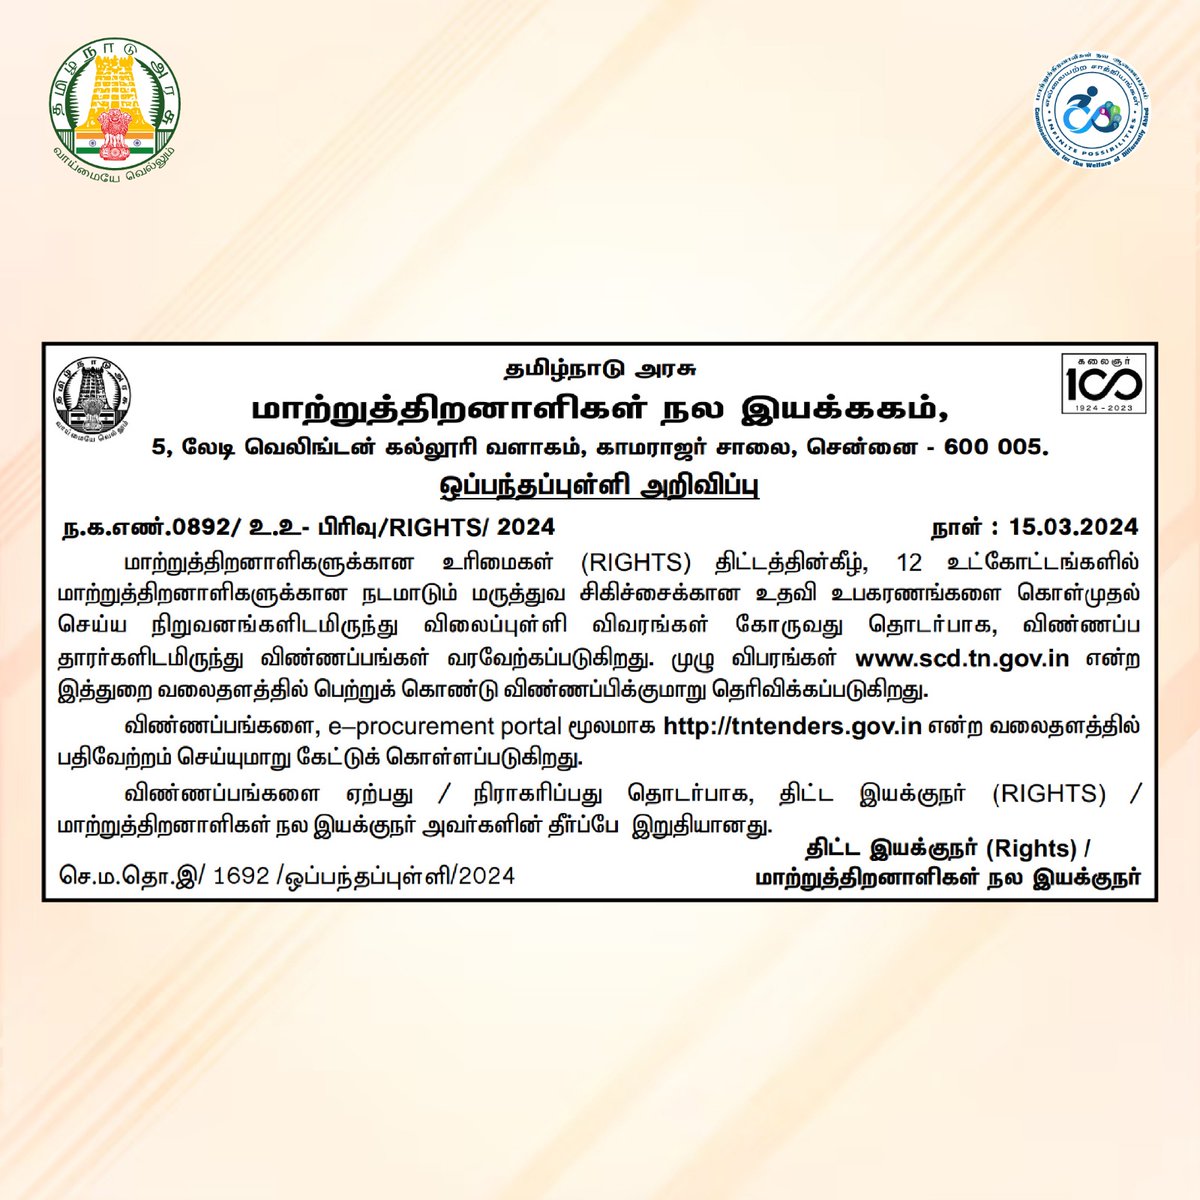 Commissionerate - Welfare of Differently Abled, TN (@Tn_Diff_abled) on Twitter photo 2024-03-16 11:37:14